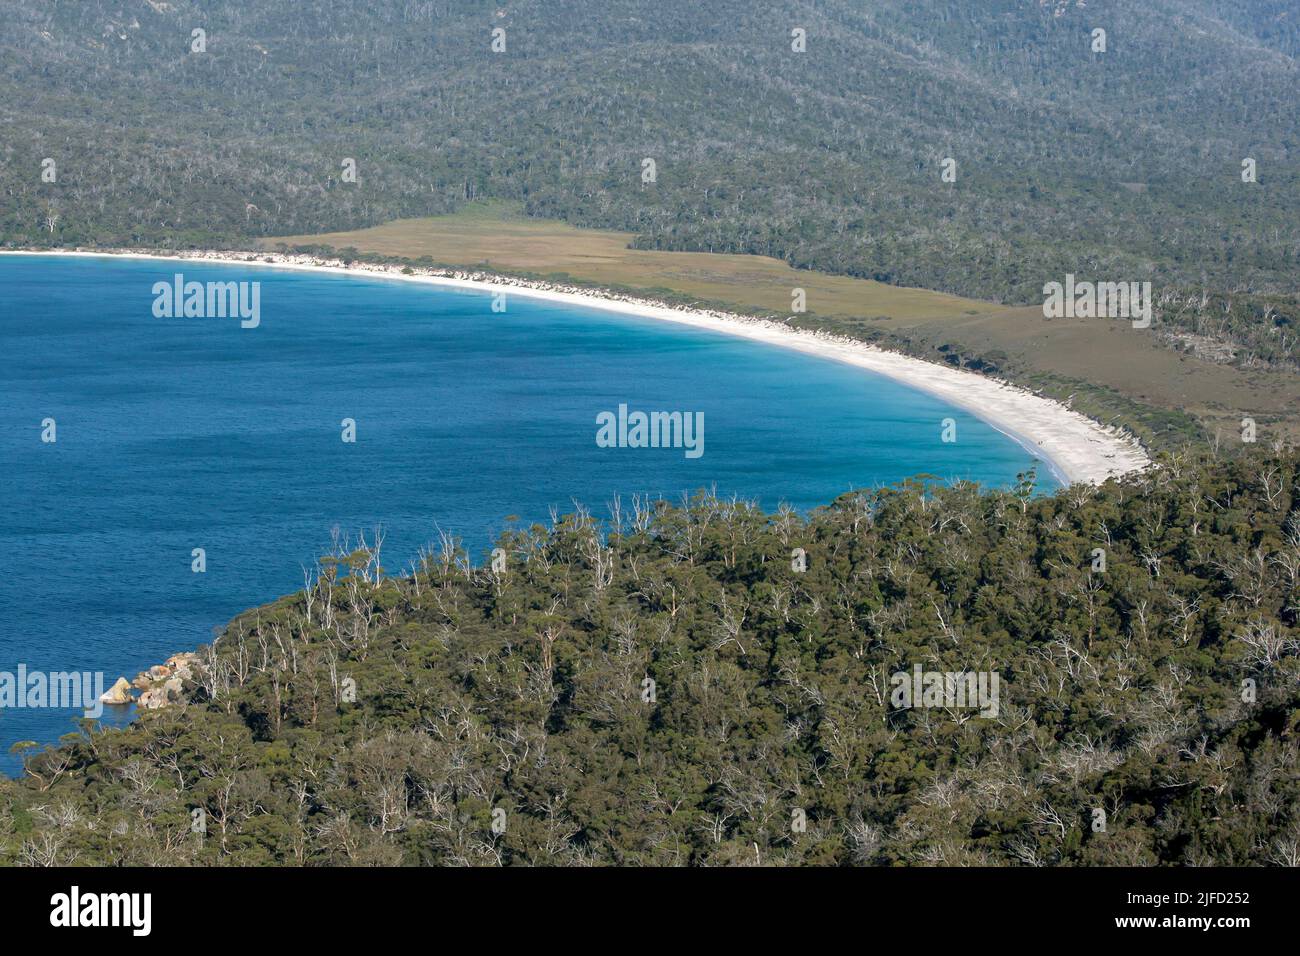 A view of Wineglass Bay in Freycinet National Park from the Wineglass Bay Lookout. Freycinet is located on the east coast of Tasmania in Australia. Stock Photo